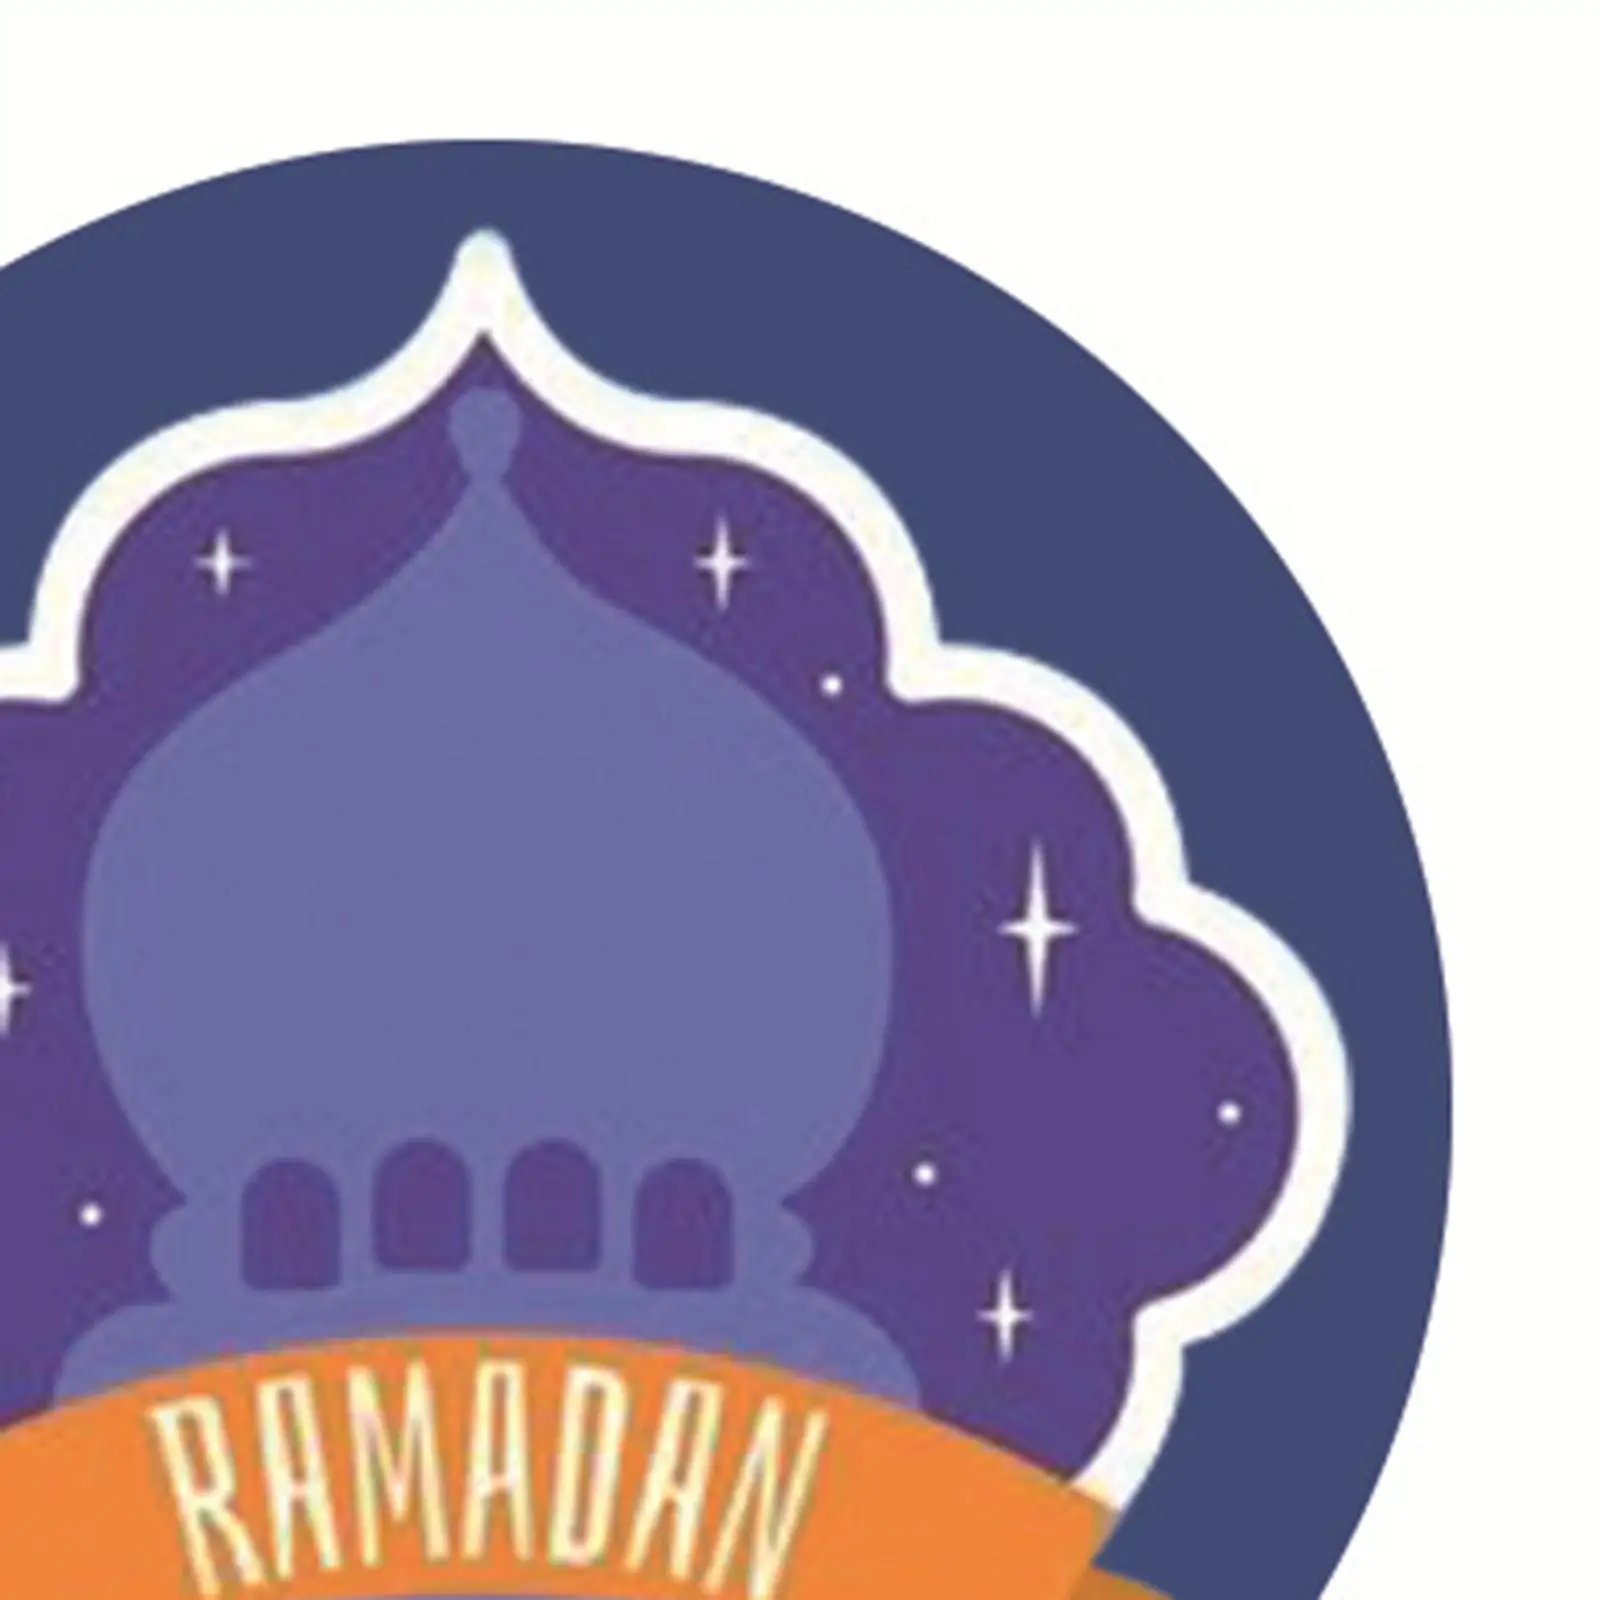 Ramadan Stickers Baking Stickers Diary Stickers Tags Gifts Wrapping Stickers Eid Mubarak Stickers for Party Banquet Letters